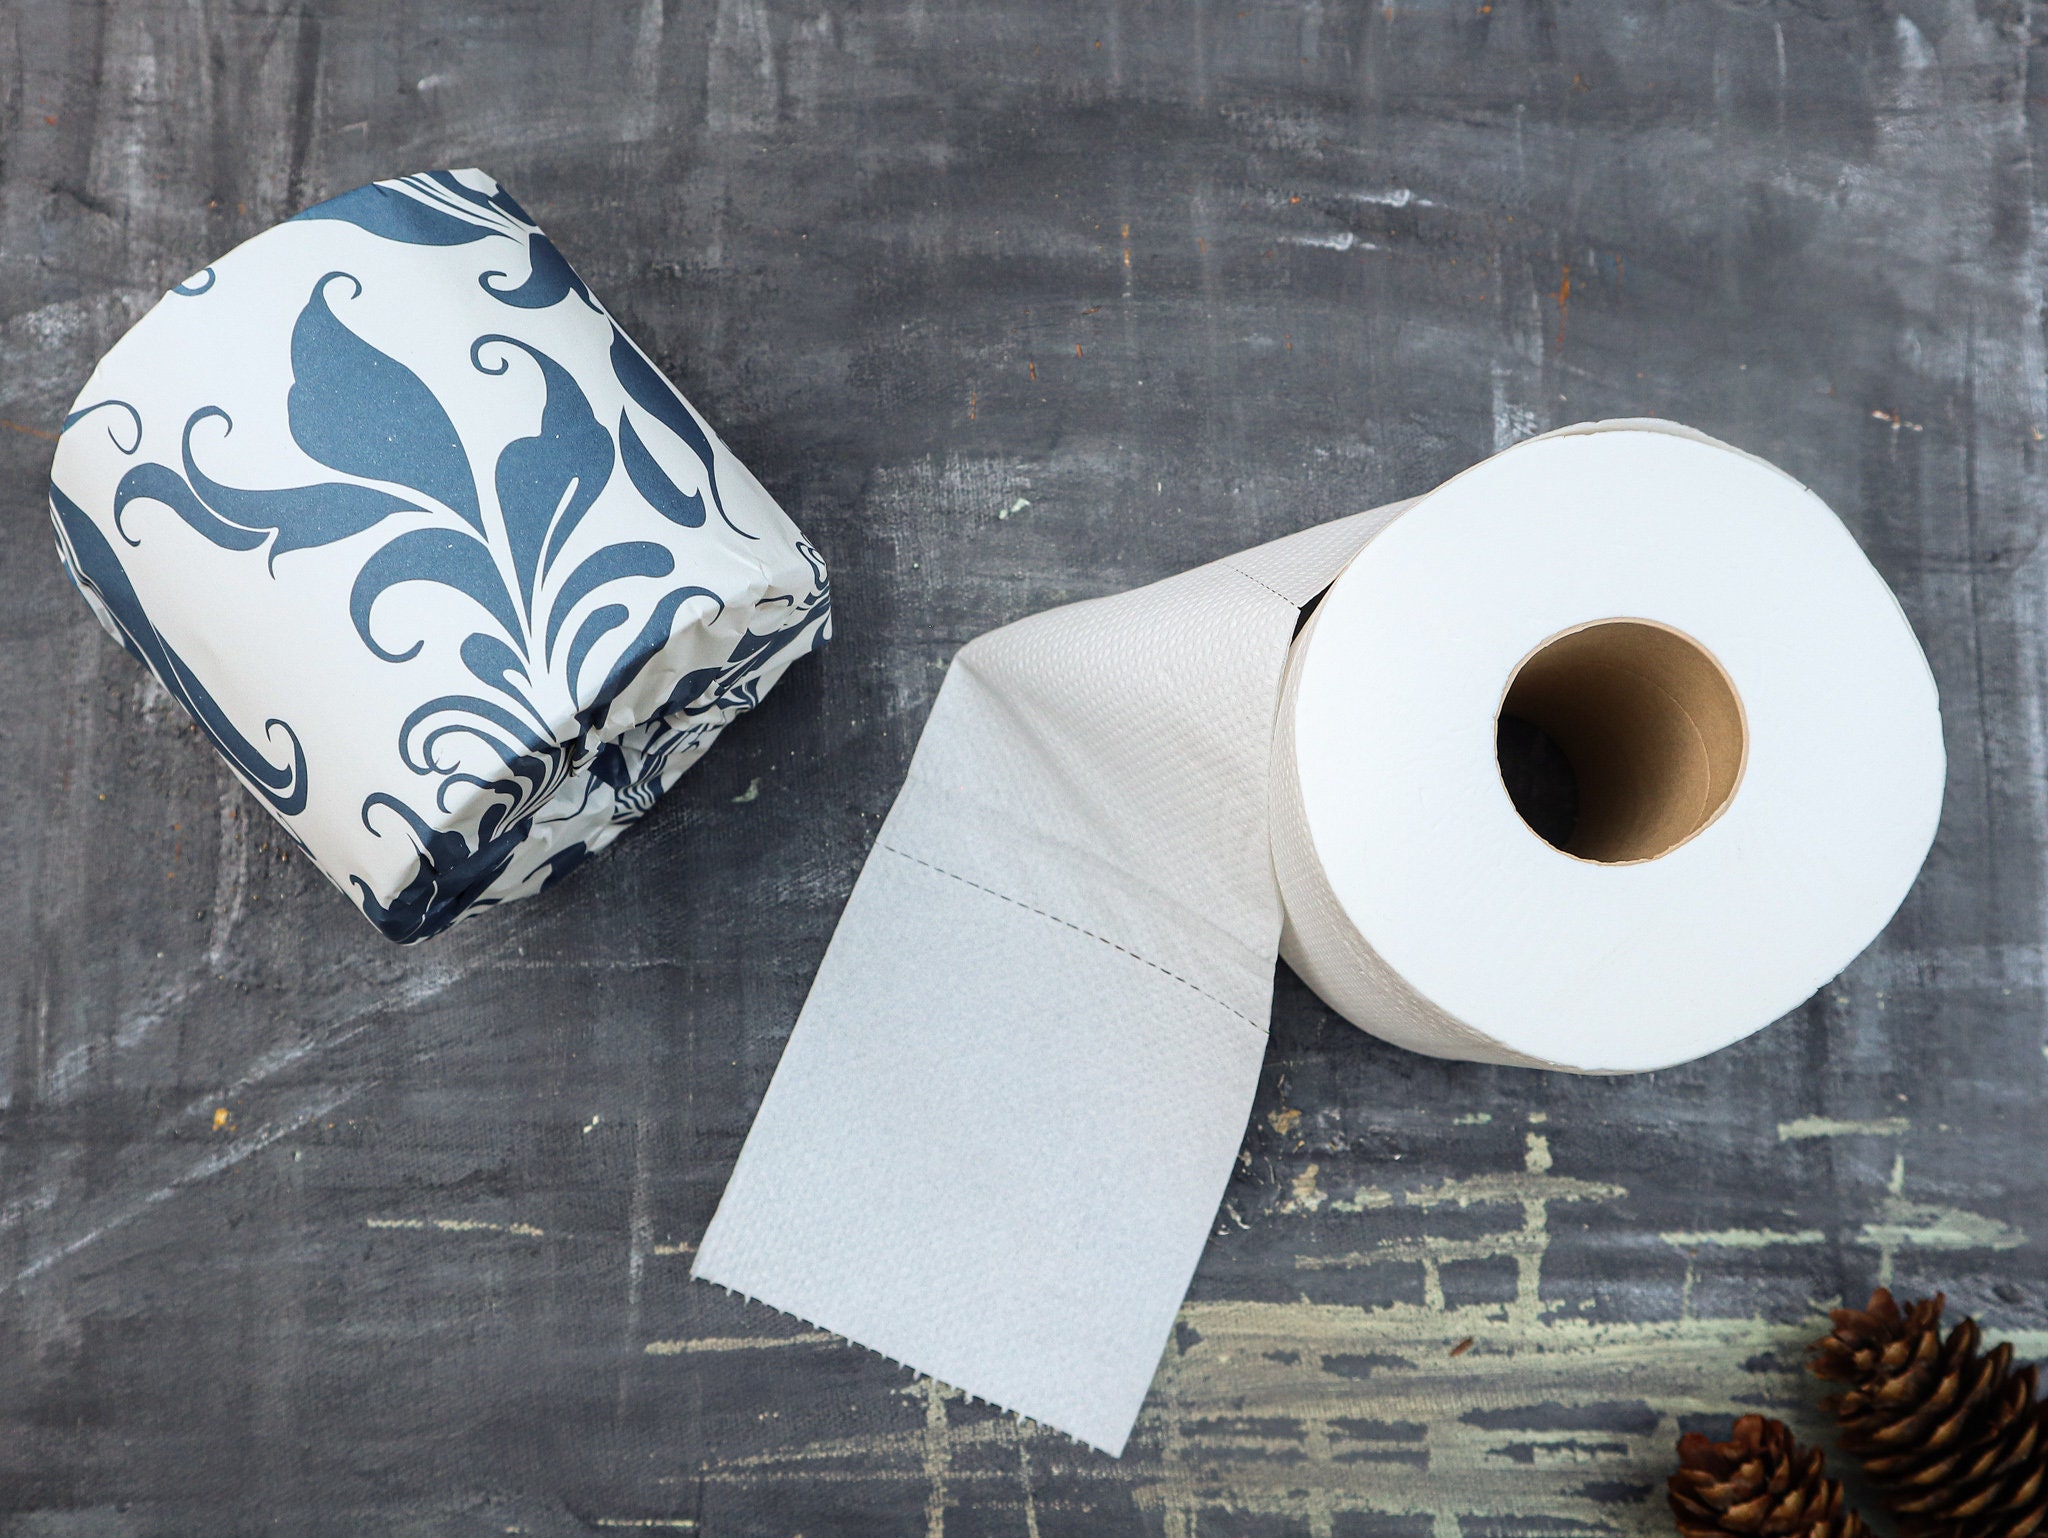 toilet paper bamboo online